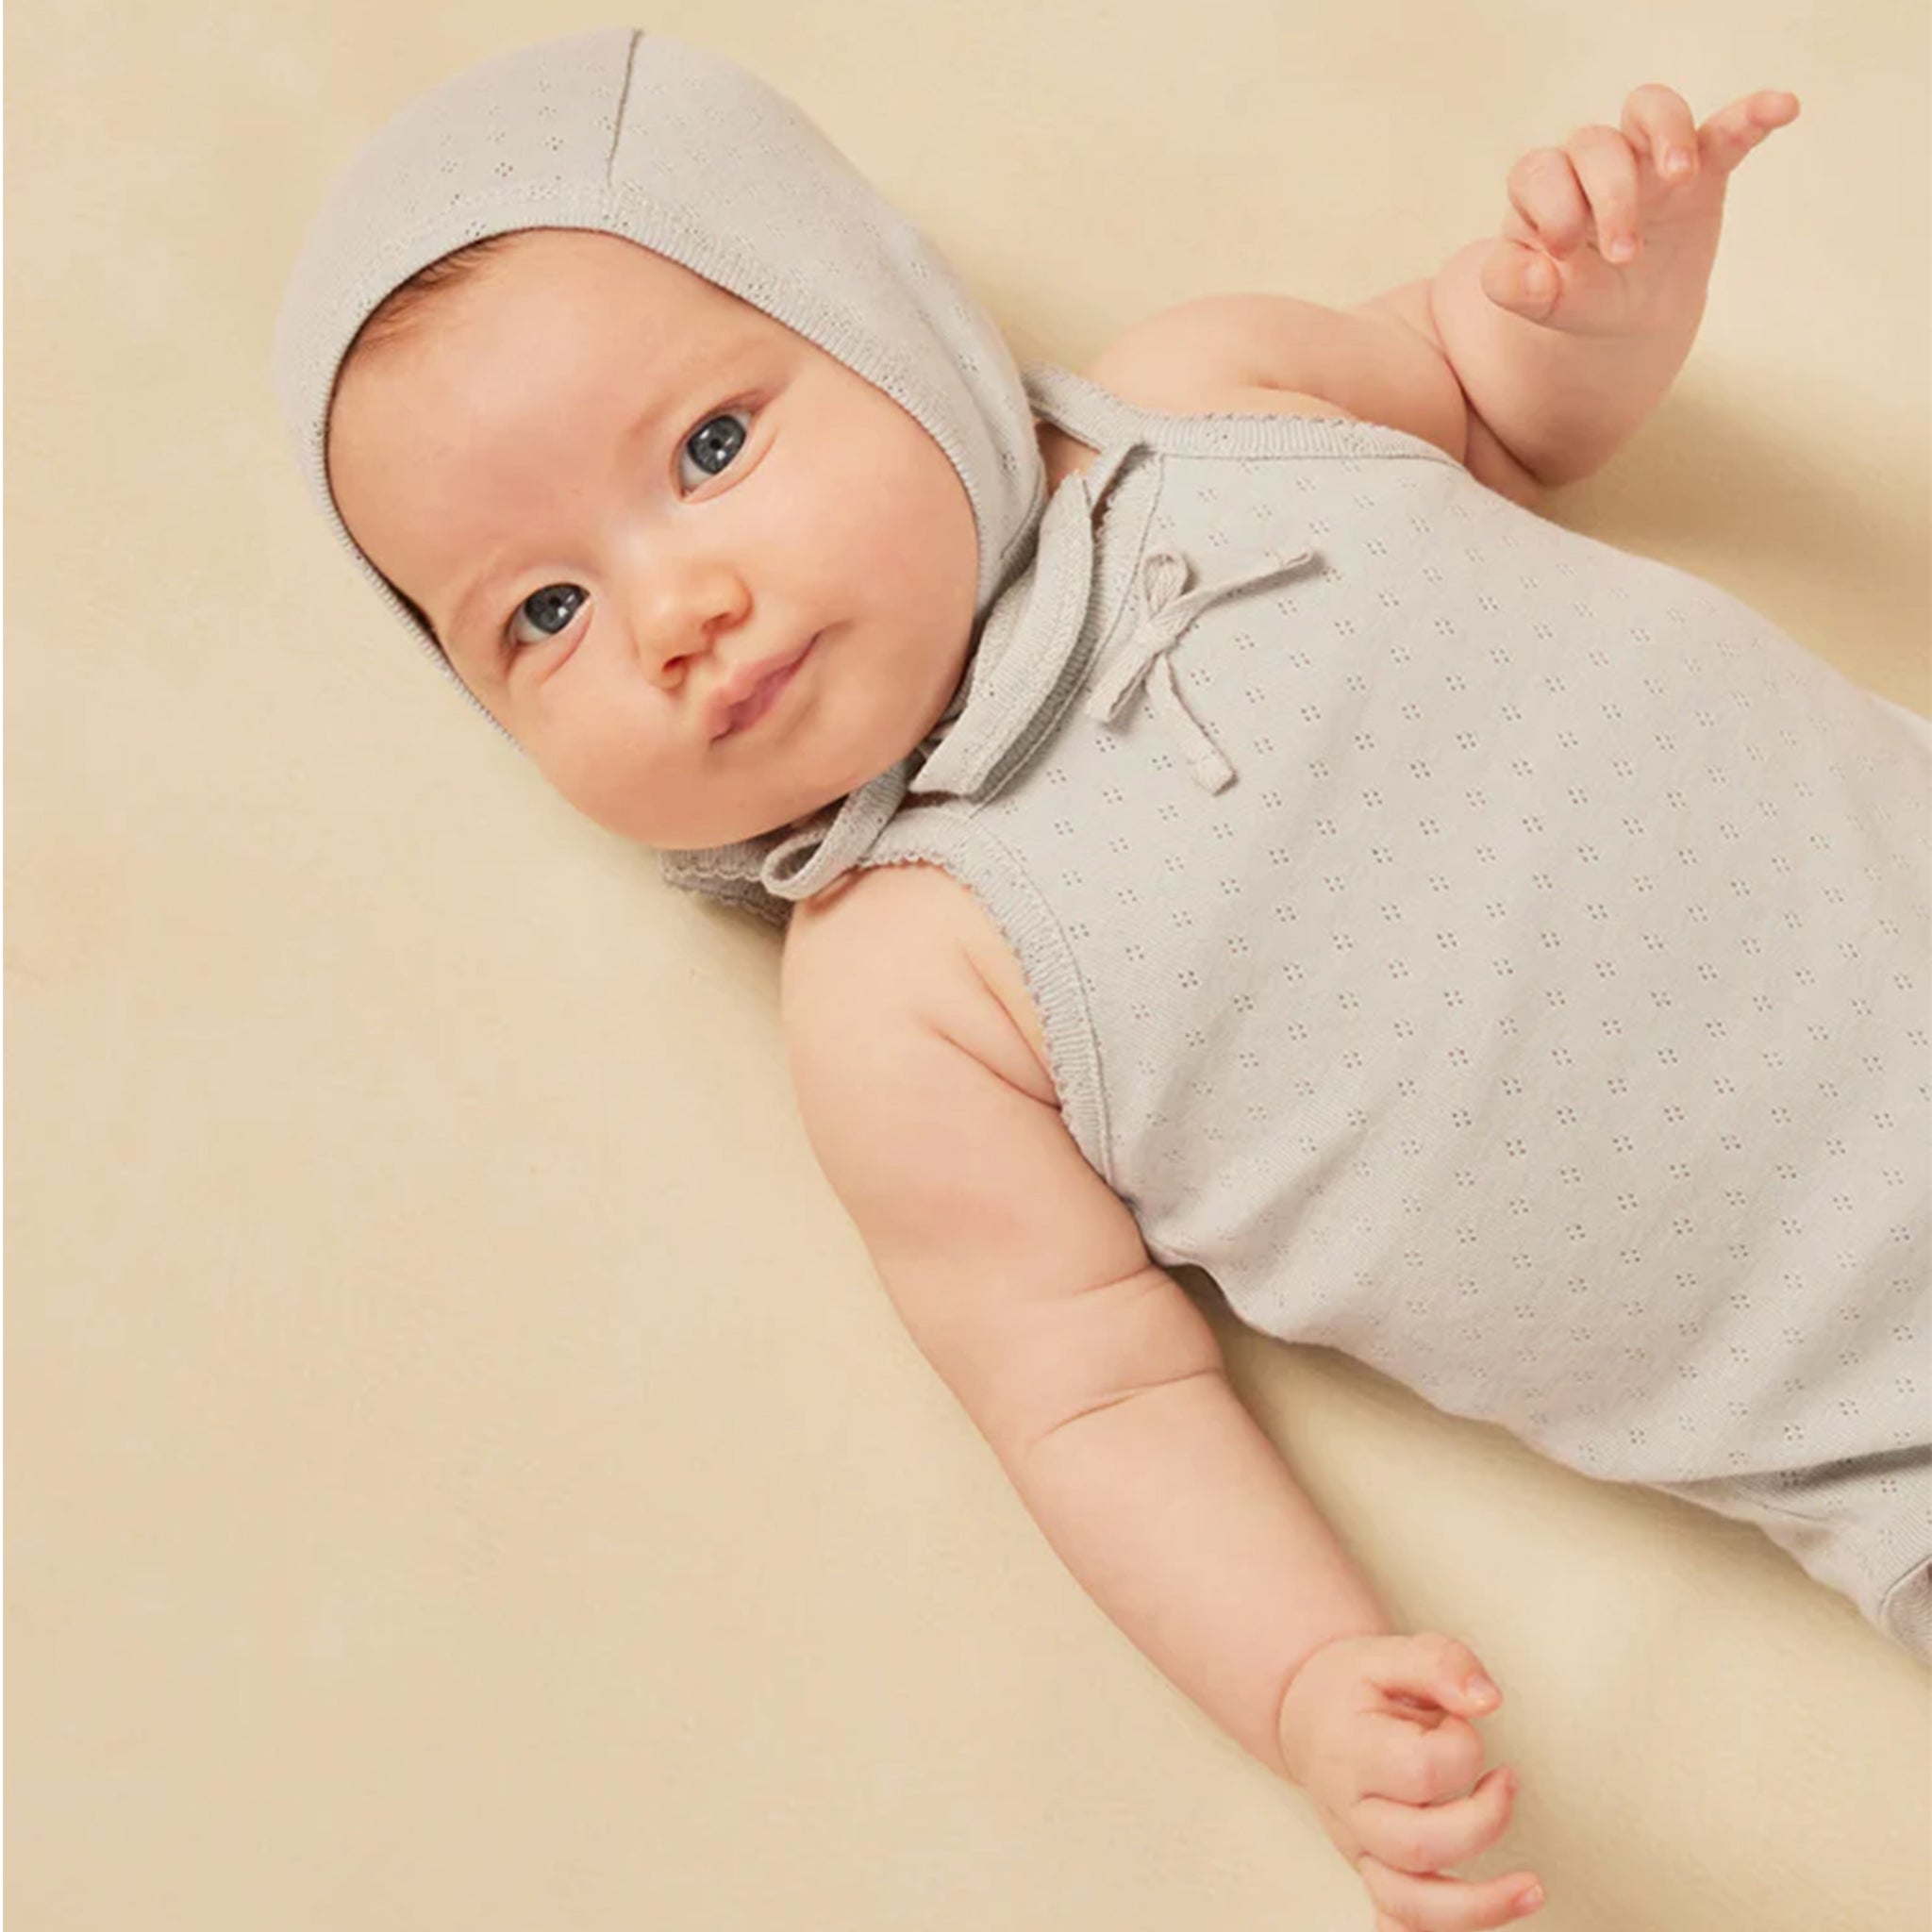 On a tan background is a light blue tank onesie with snap closure and a small bow detail at the top.